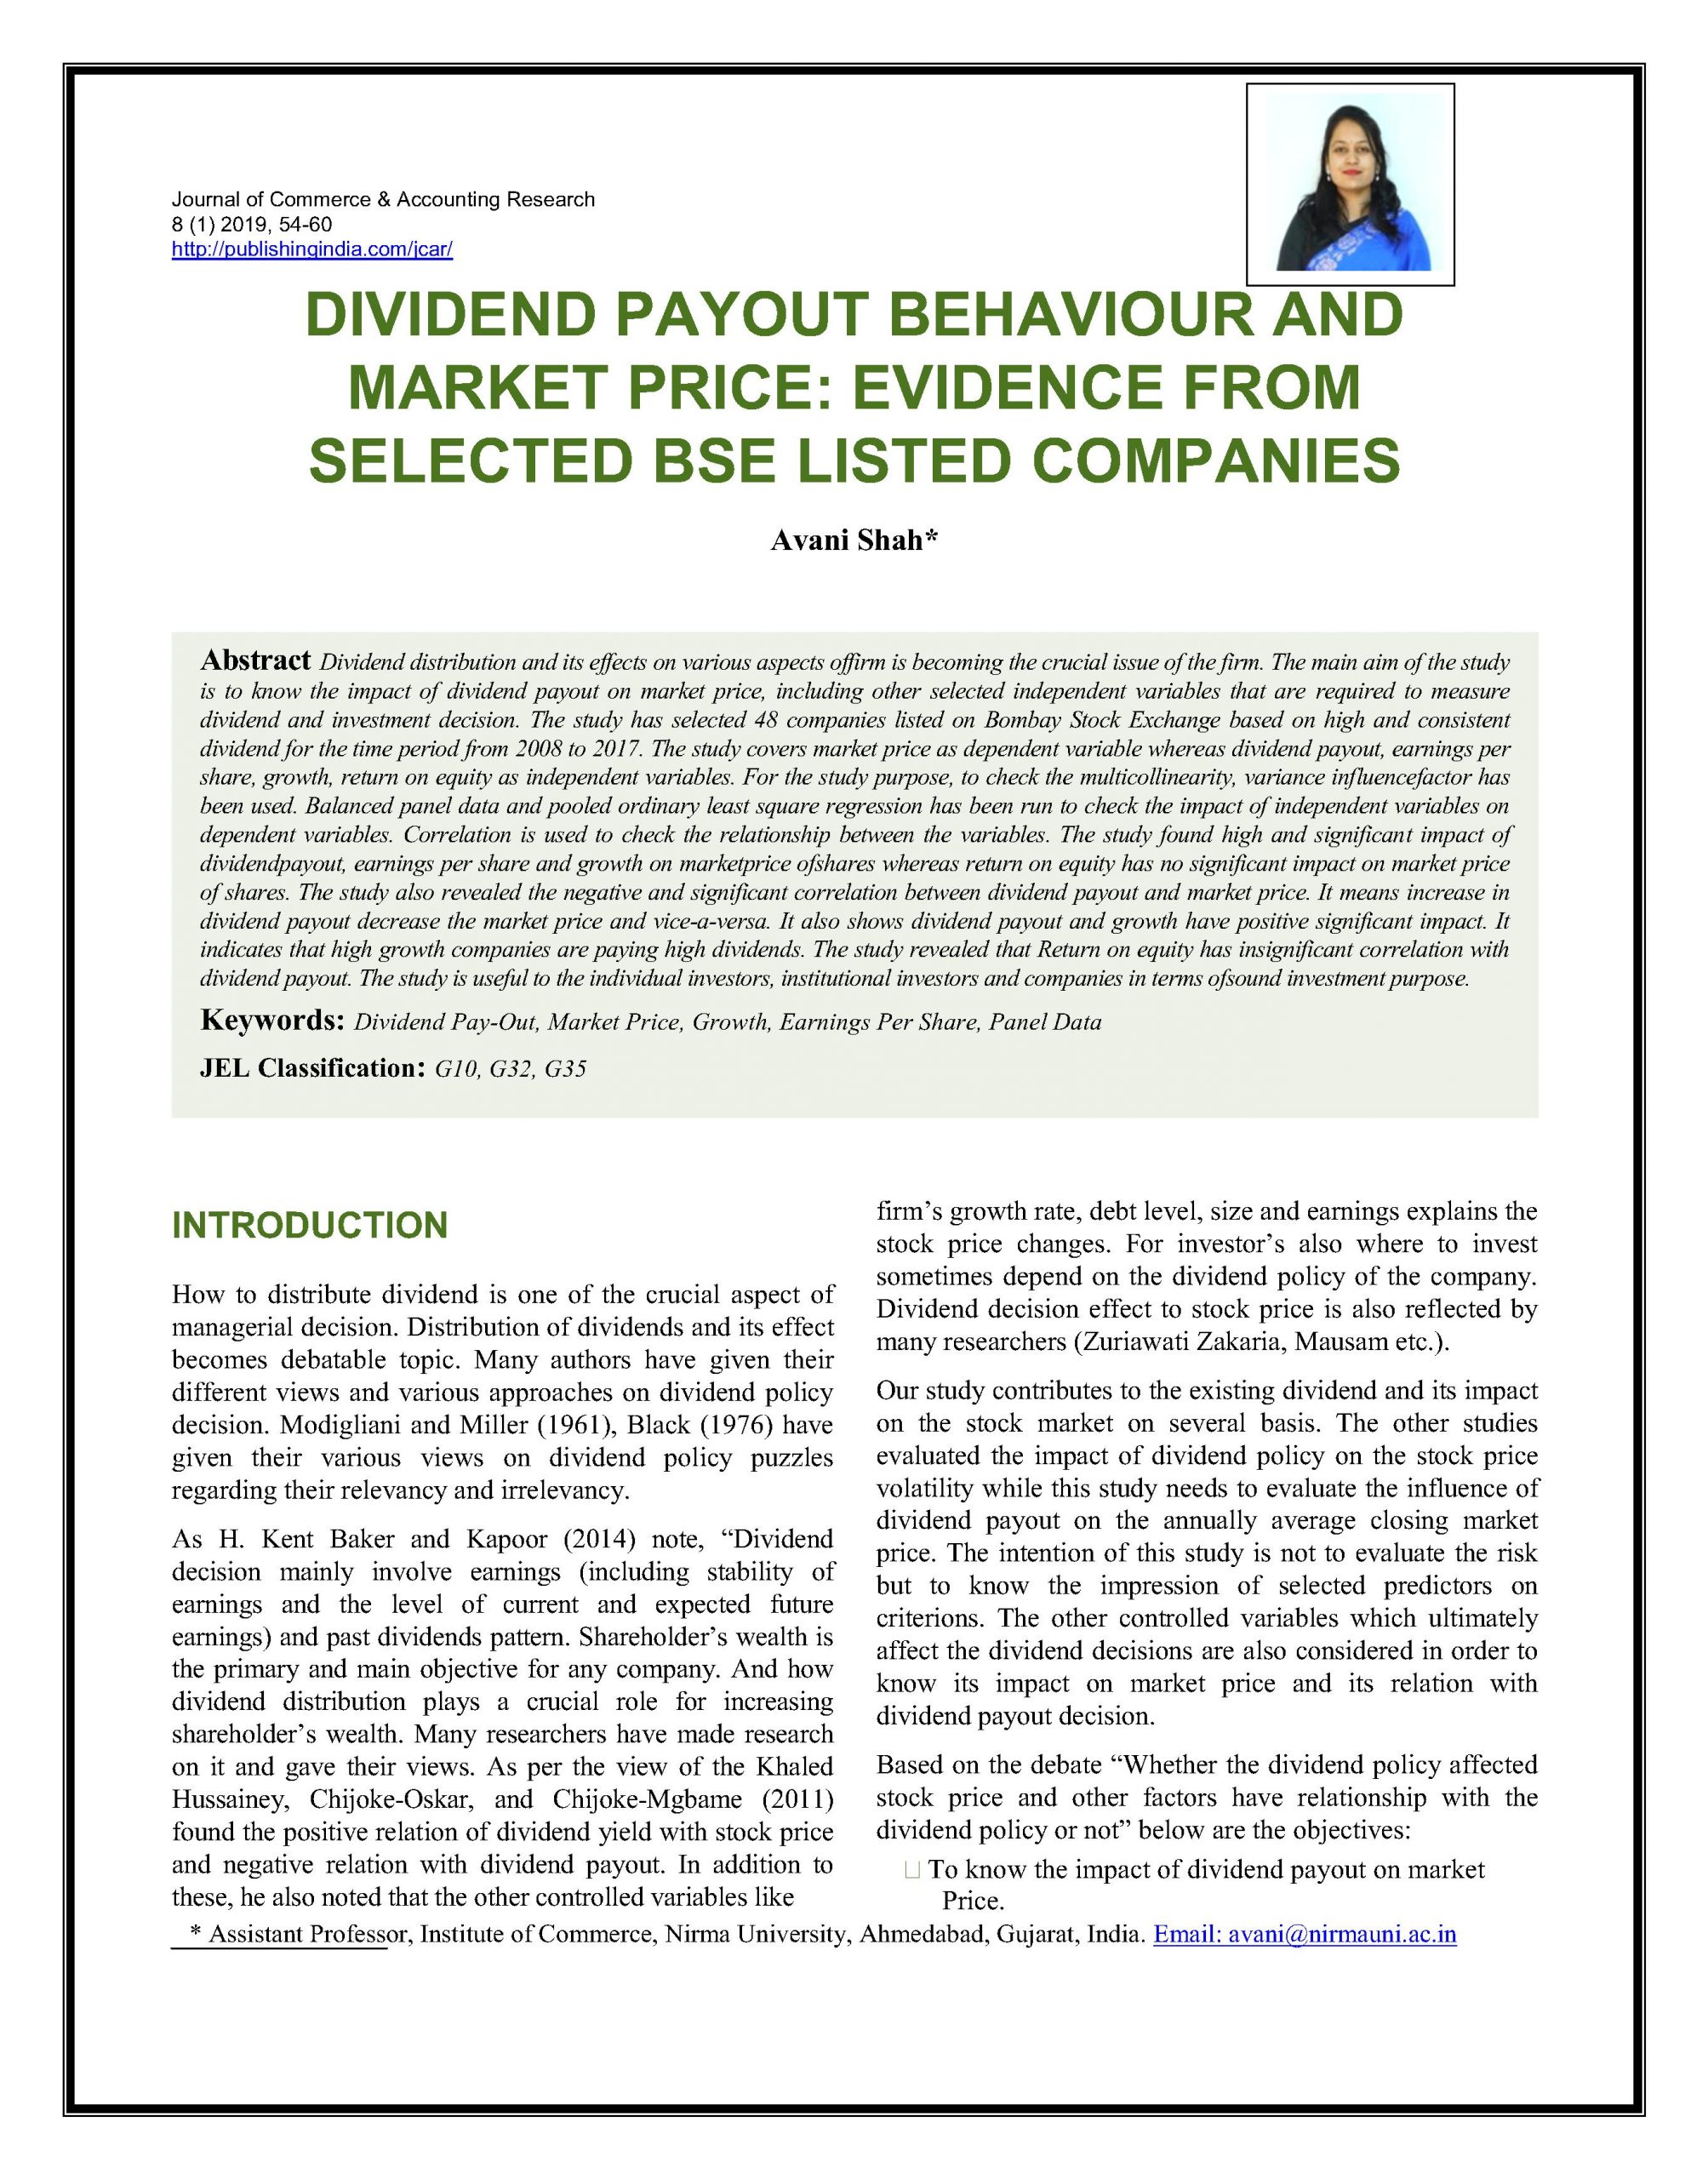 Dividend Payout Behaviour and Market Price: Evidence from Selected BSE Listed Companies